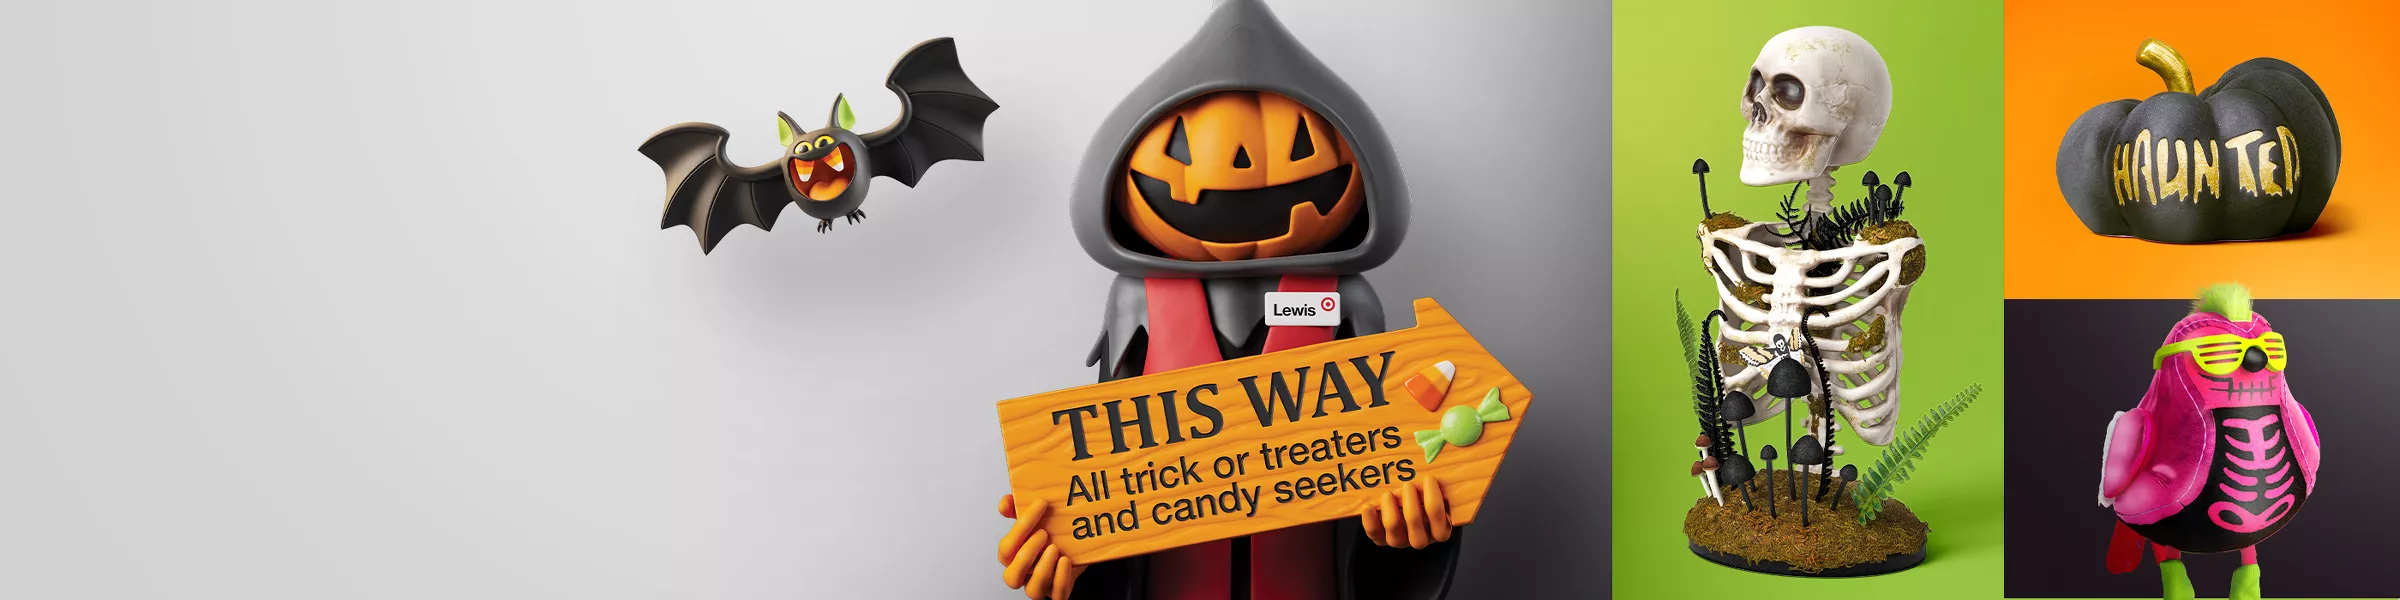 This way
All trick or treaters and candy seekers